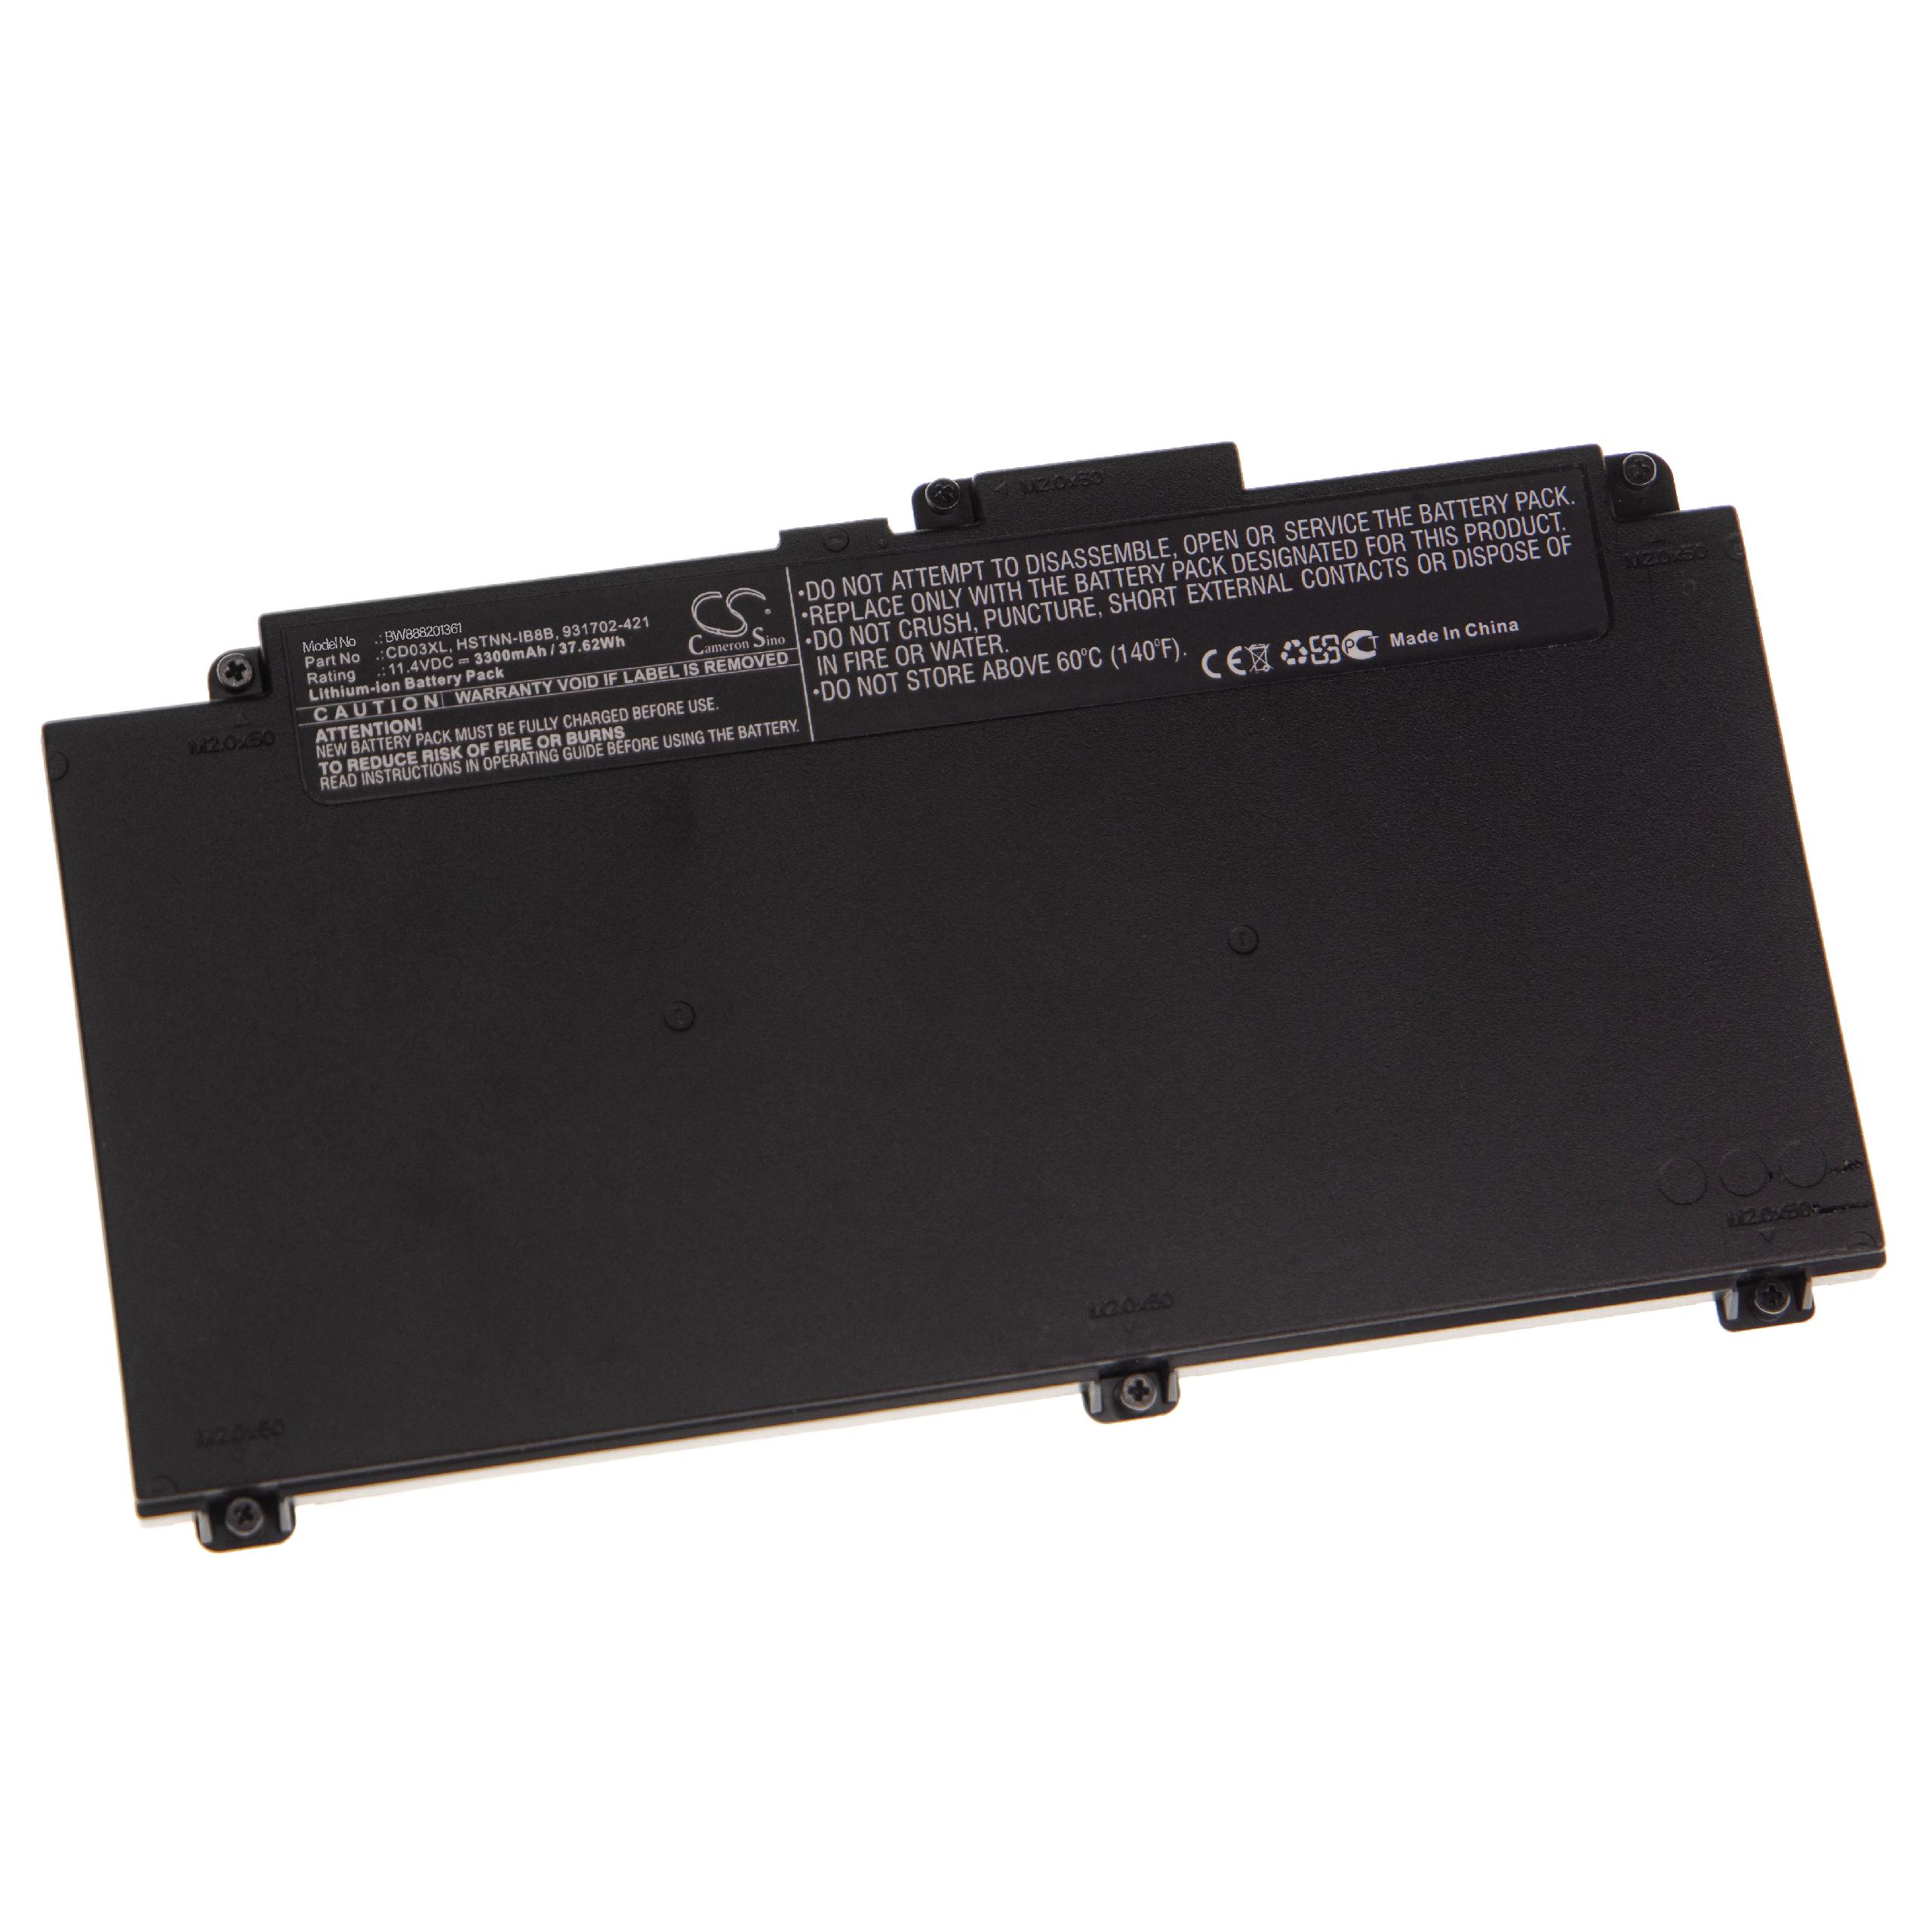 Notebook Battery Replacement for HP 931702-421, 931702-171, 931702-541 - 3300mAh 11.4V Li-Ion, black